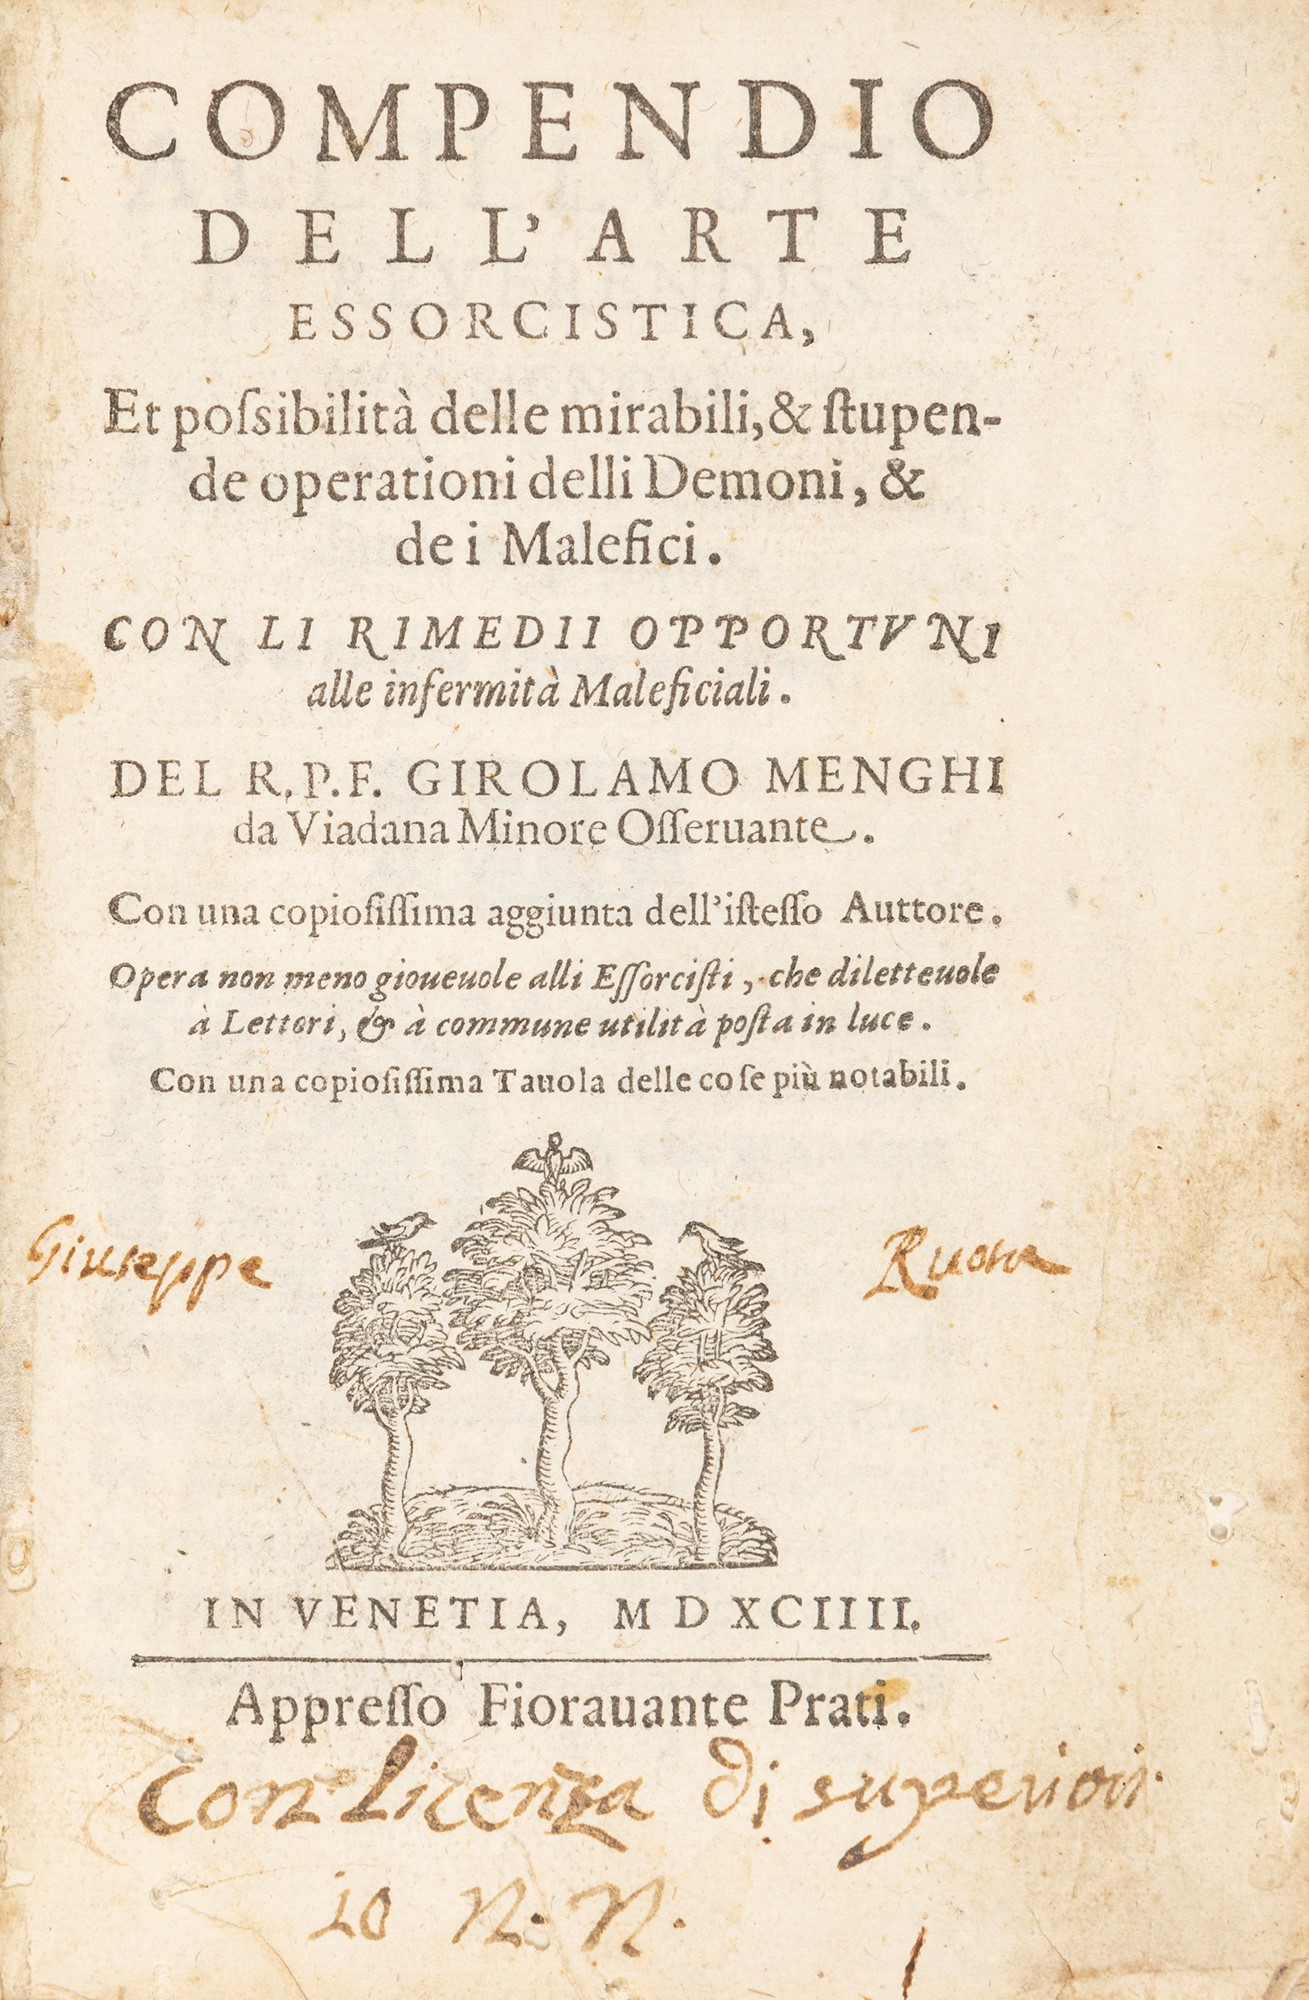 Demonologia - Occultismo - Menghi, Girolamo - Compendium of the art of exorcism, and the possibility